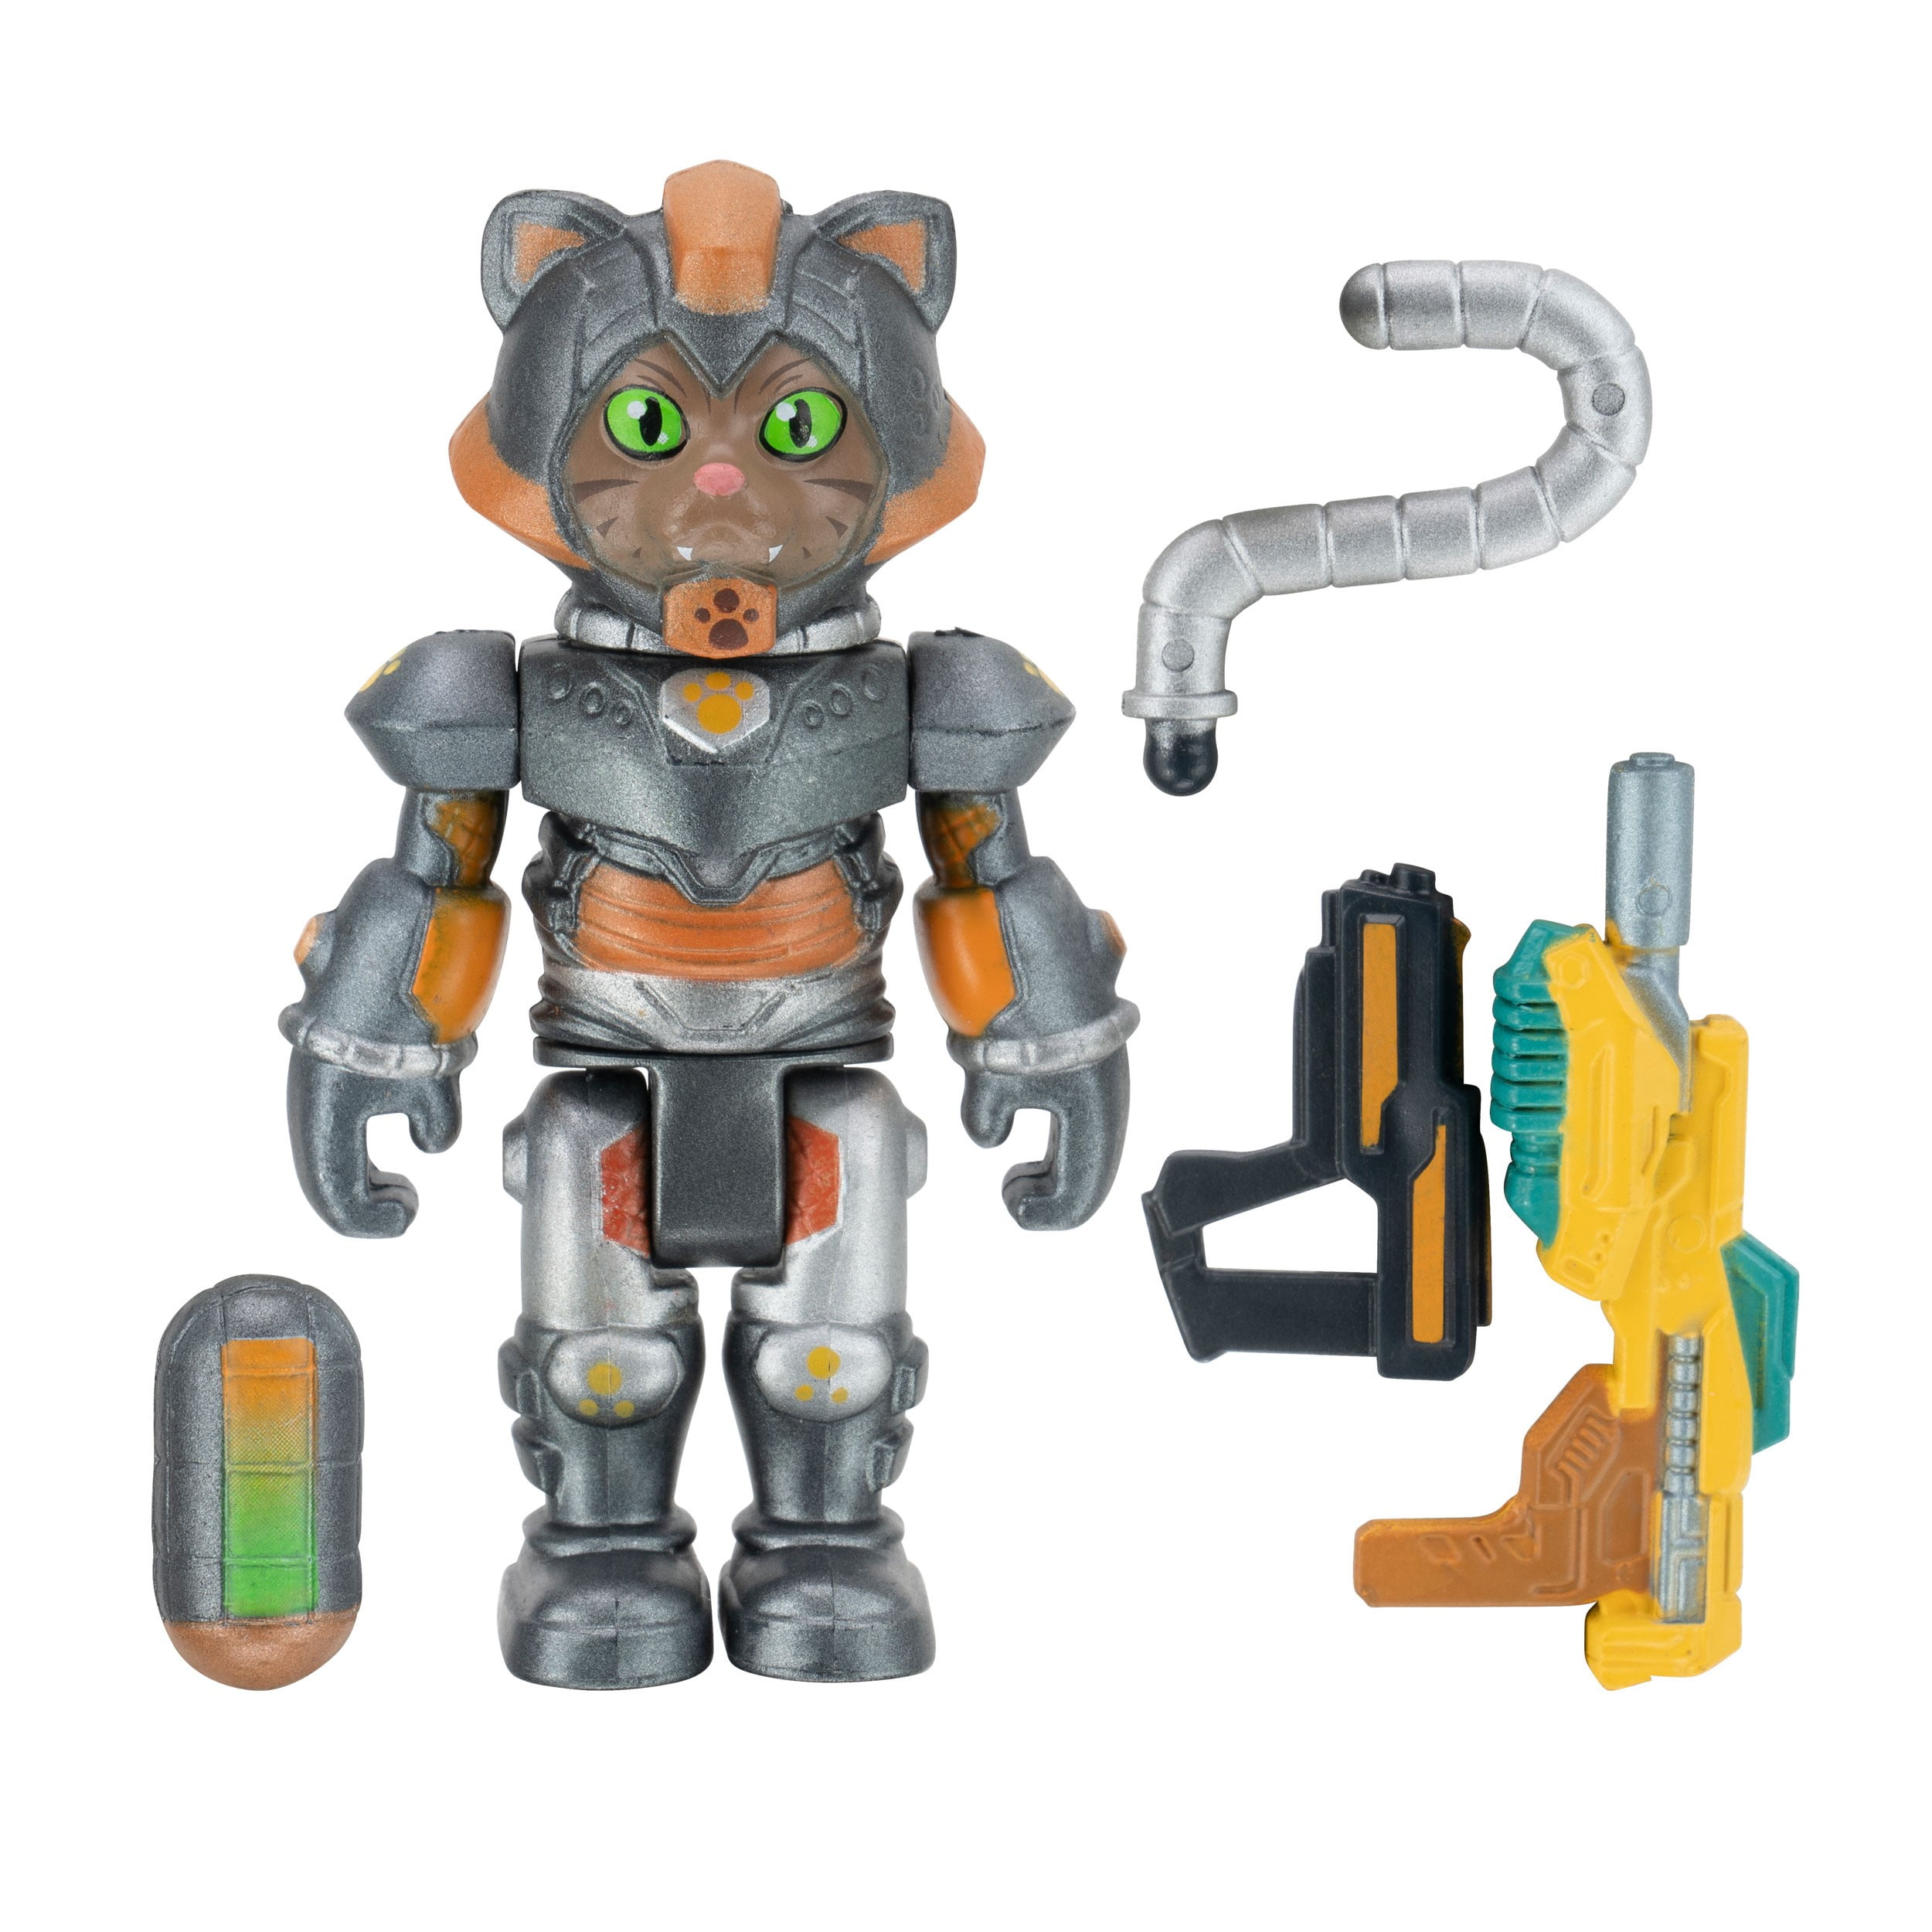 Roblox Celebrity Collection Cats In Space Sergeant Tabbs Figure Pack Includes Exclusive Virtual Item Walmart Com Walmart Com - roblox cat decals